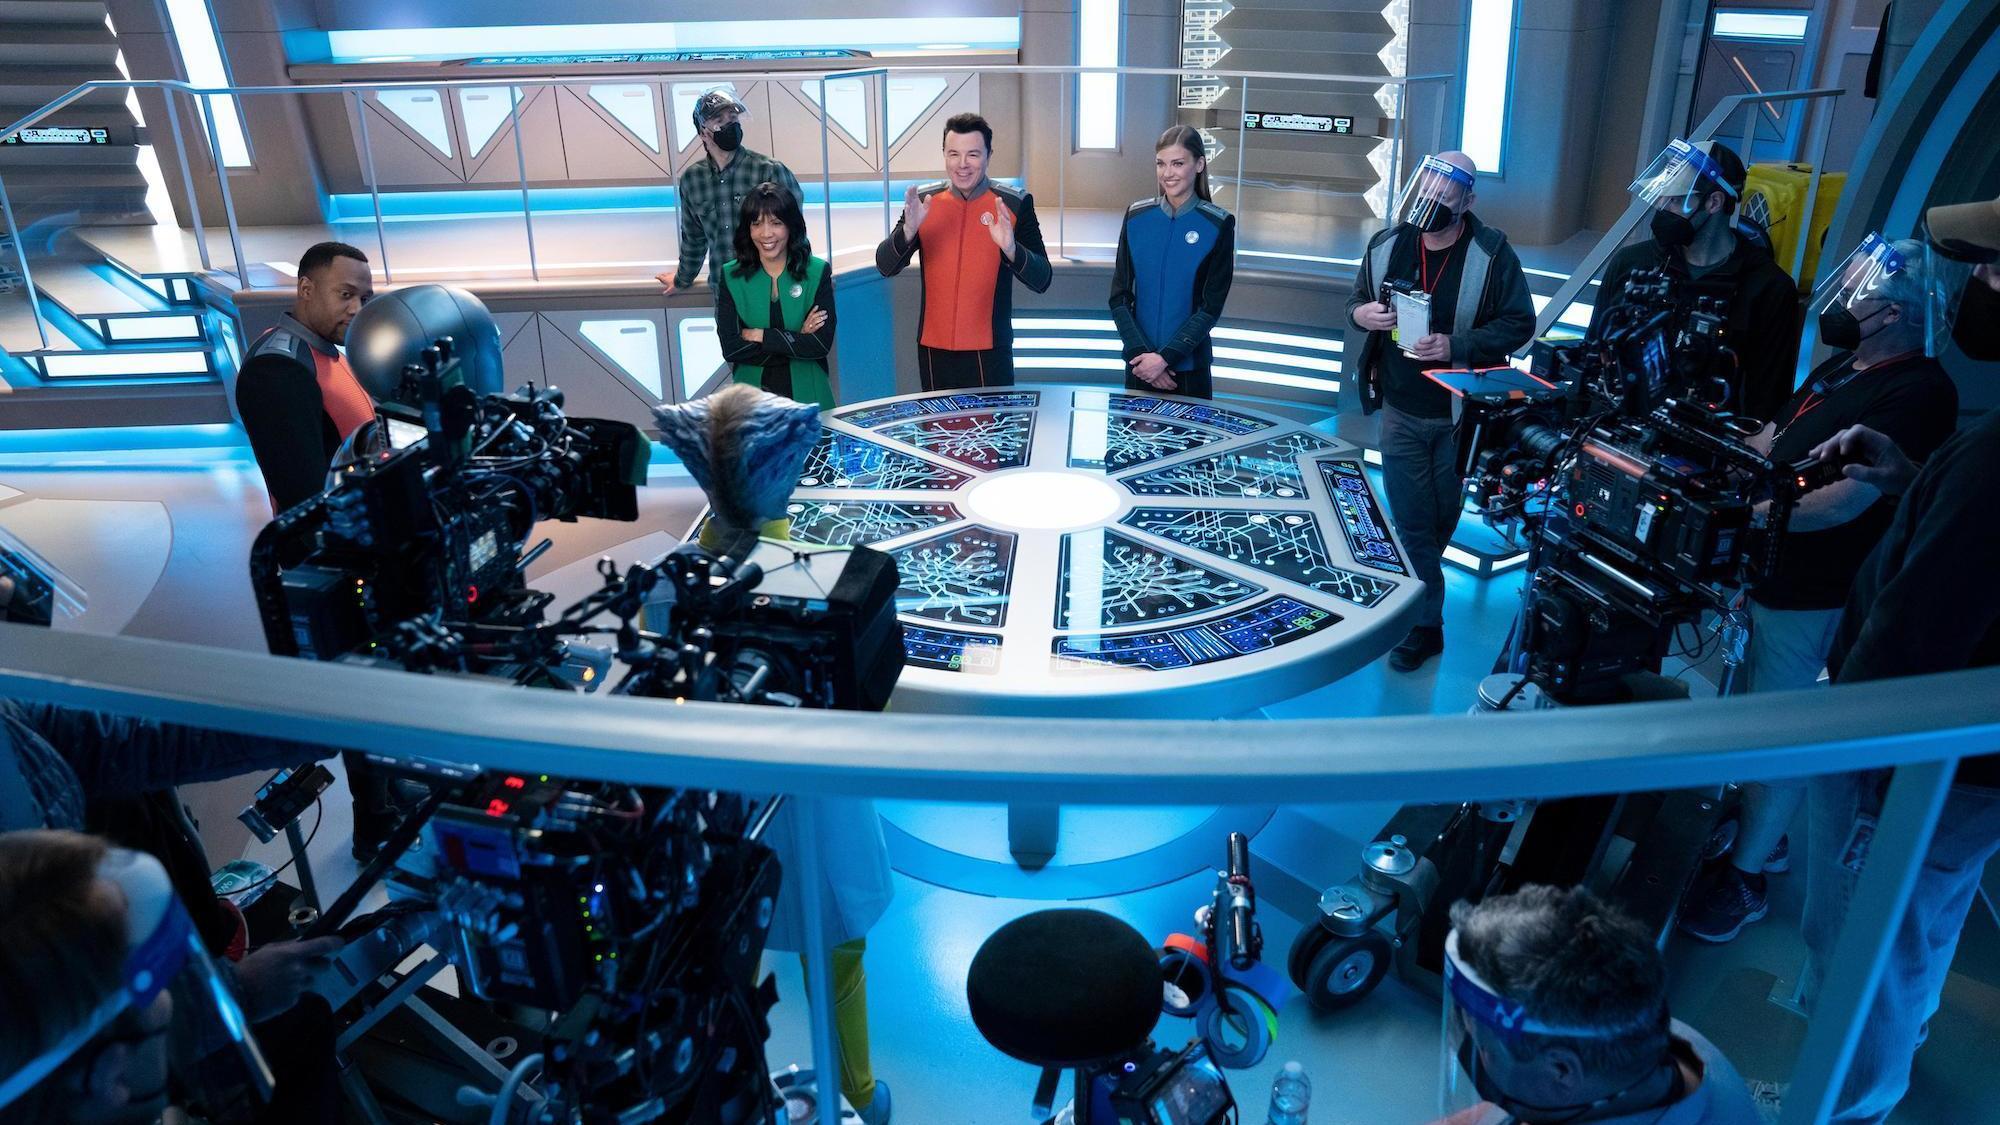 The Orville: New Horizons -- “From Unknown Graves” - Episode 307 -- The Orville discovers a Kaylon with a very special ability. Lt. Cmdr. John LaMarr (J Lee), Dr. Claire Finn (Penny Johnson Jerald), Capt. Ed Mercer (Seth MacFarlane), and Cmdr. Kelly Grayson (Adrianne Palicki), shown. (Photo by: Greg Gayne/Hulu)